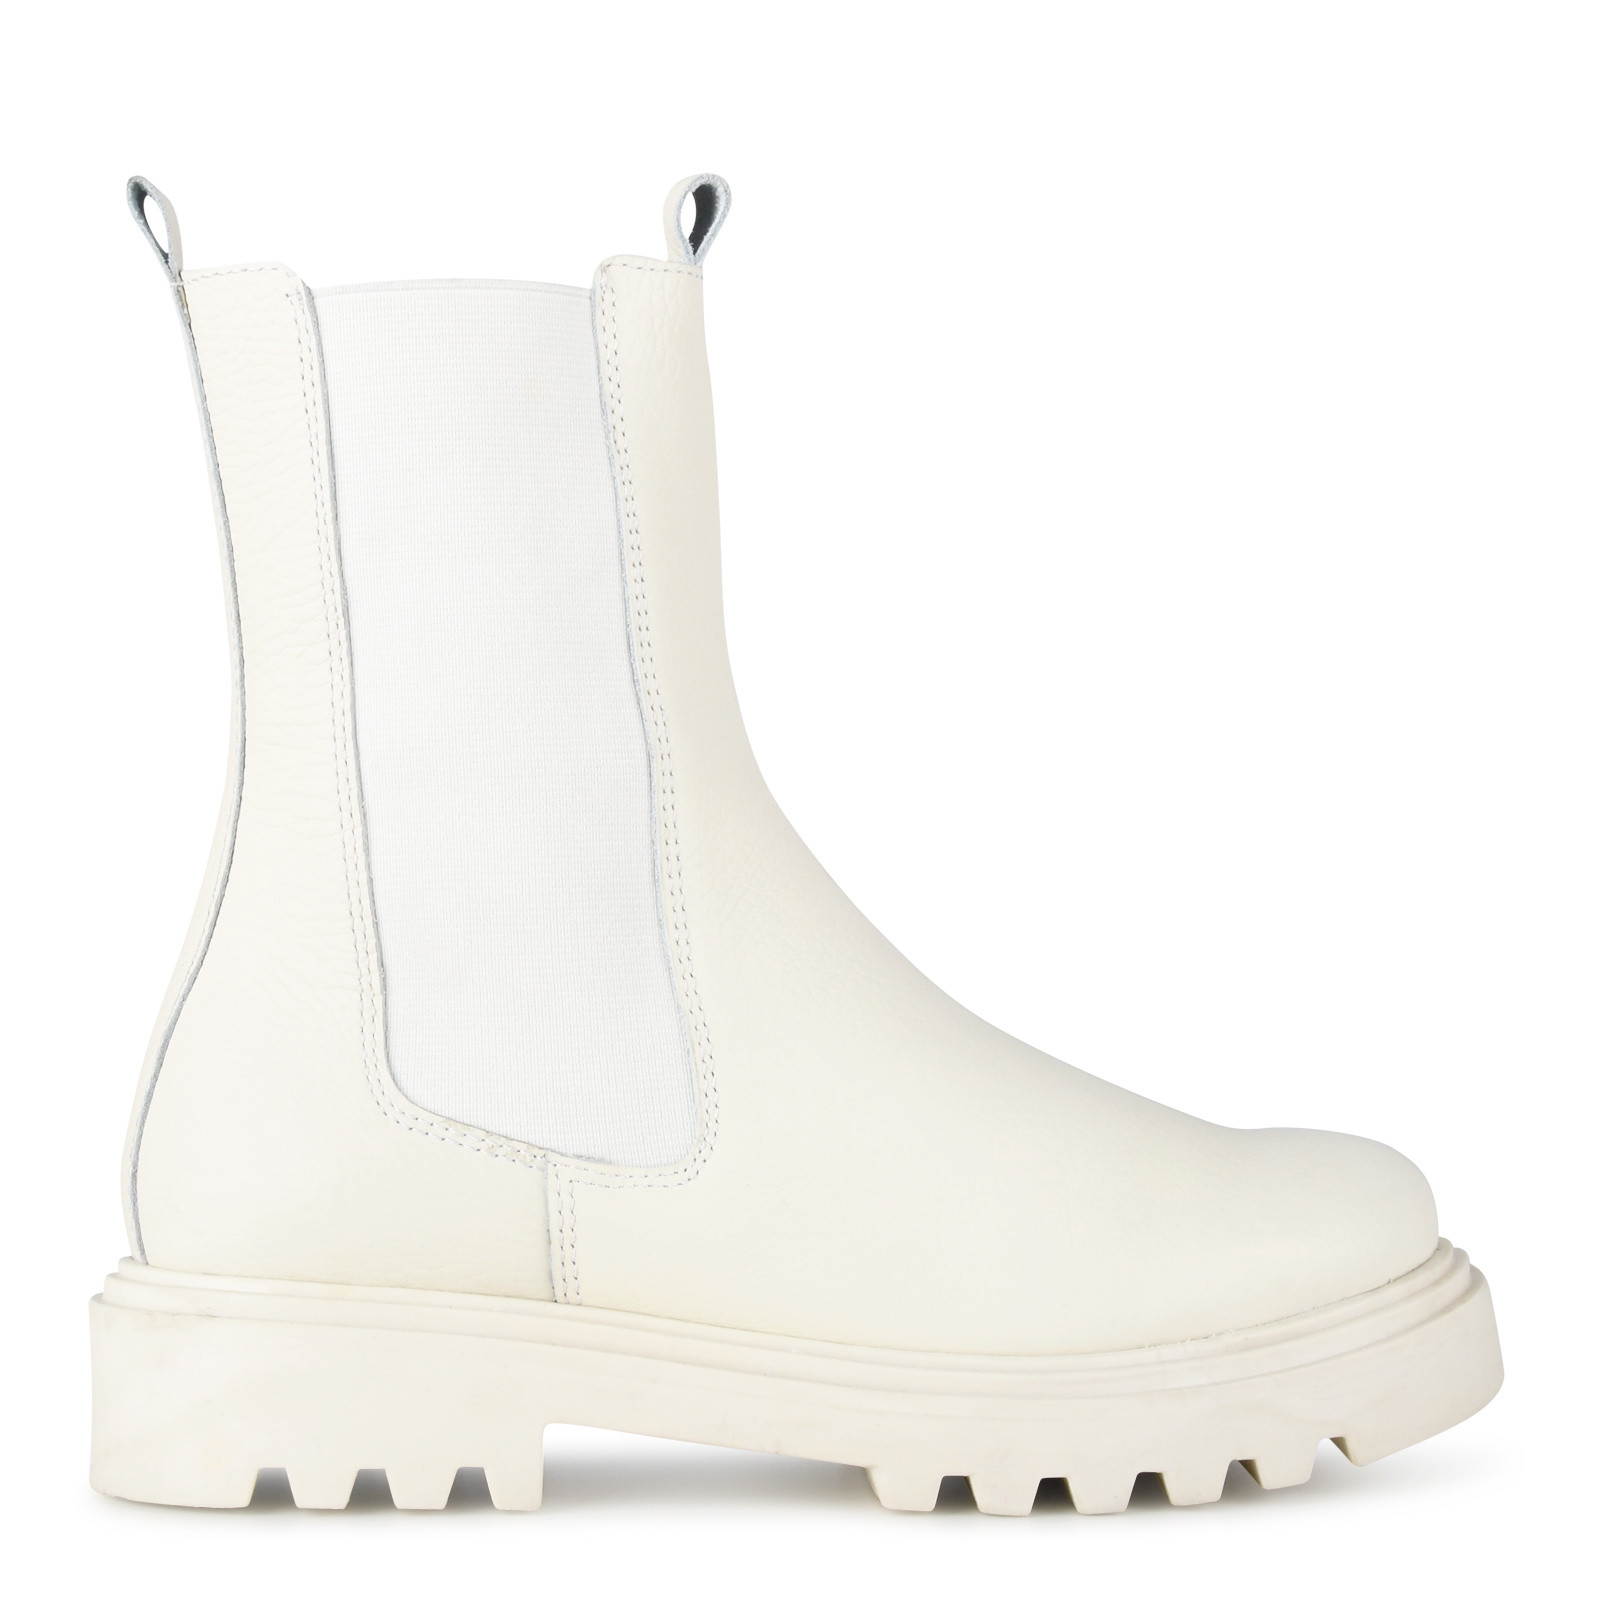 PS Poelman Boots chelsea off white